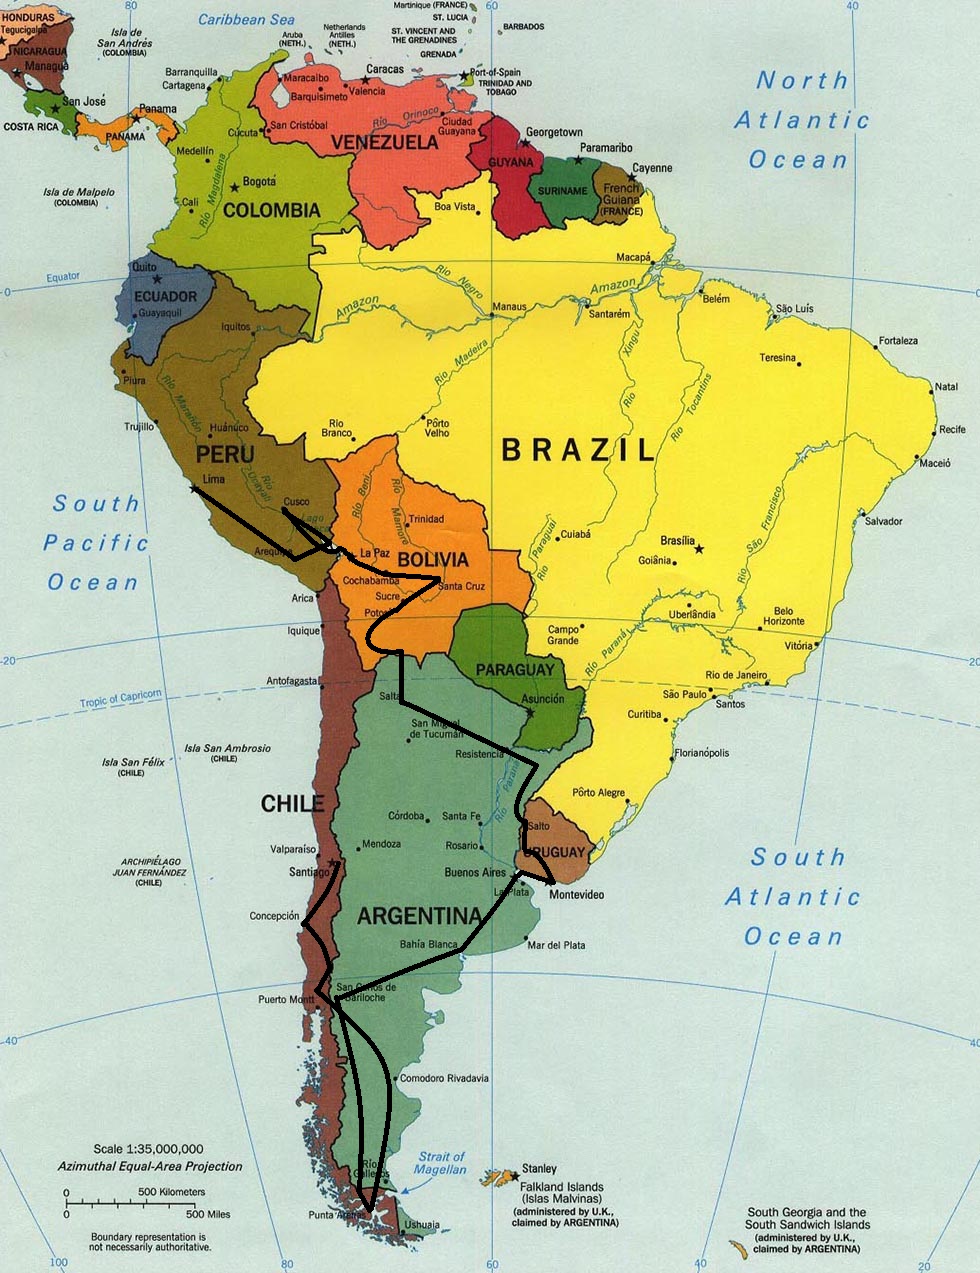 south america travel route 2 months